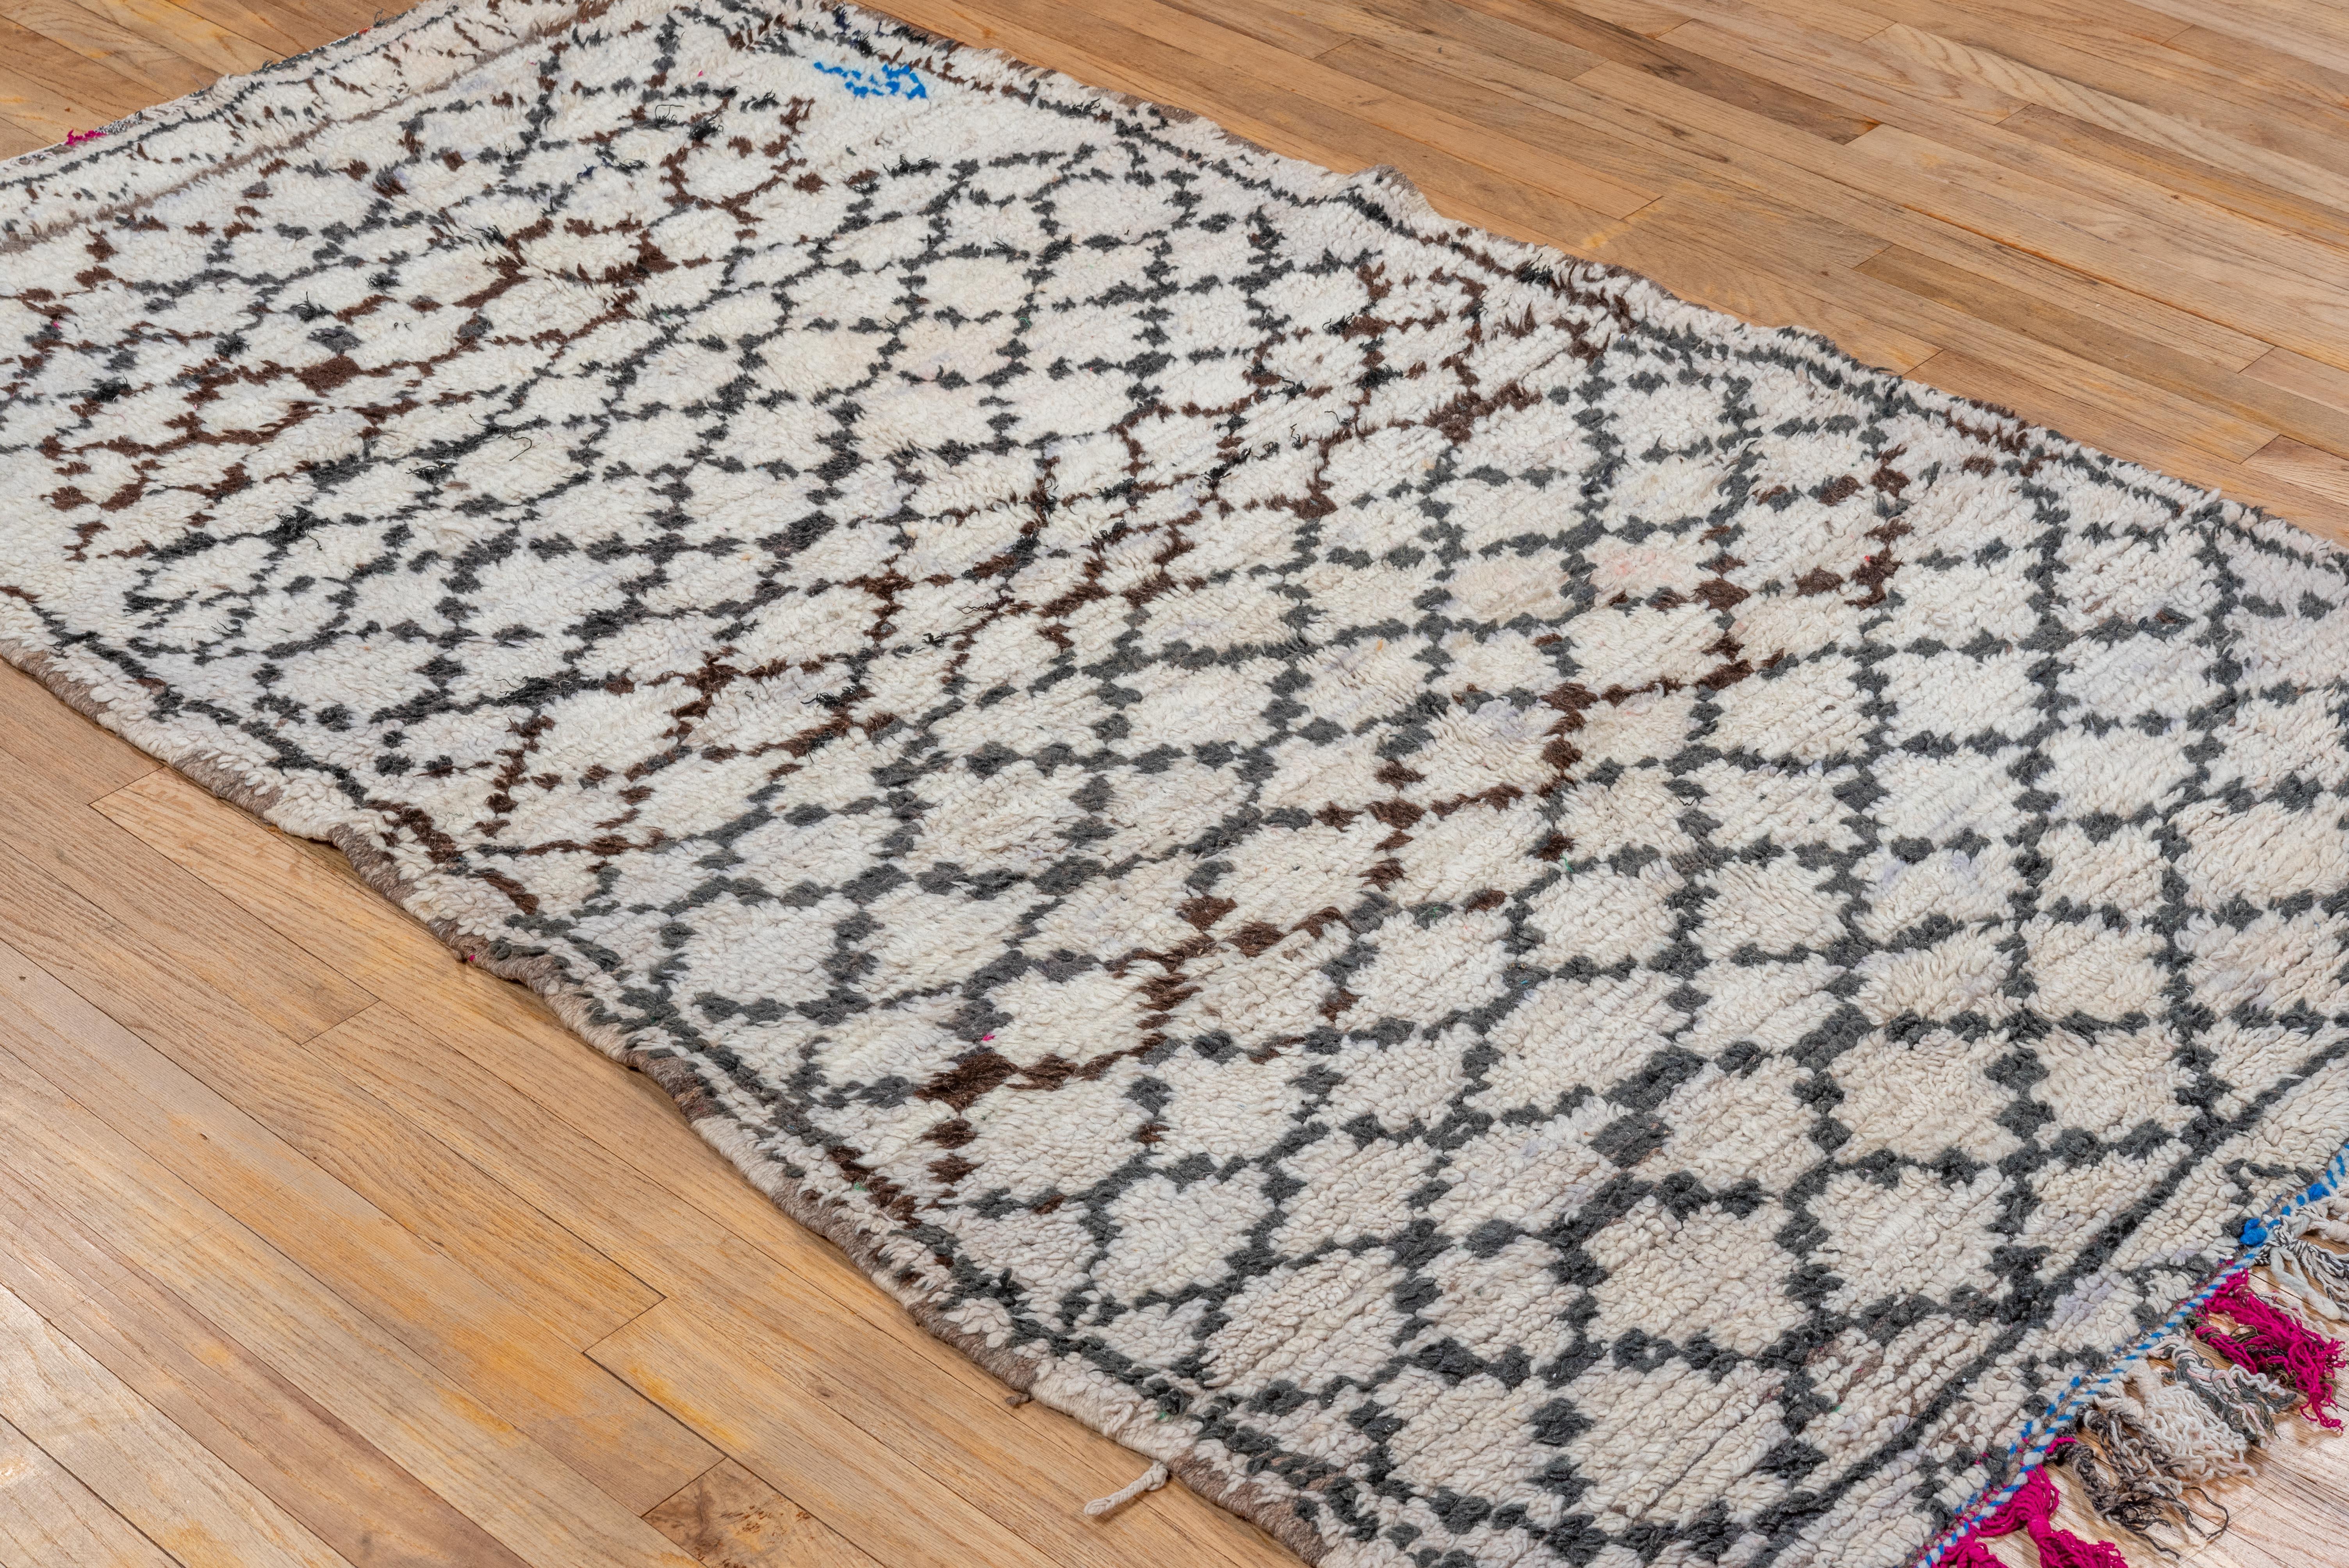 Showing signs of light use throughout, this diamond pattern rug from Moroccan made entirely of wool is a wonderful addition to any bedroom, water closet or studio space. 